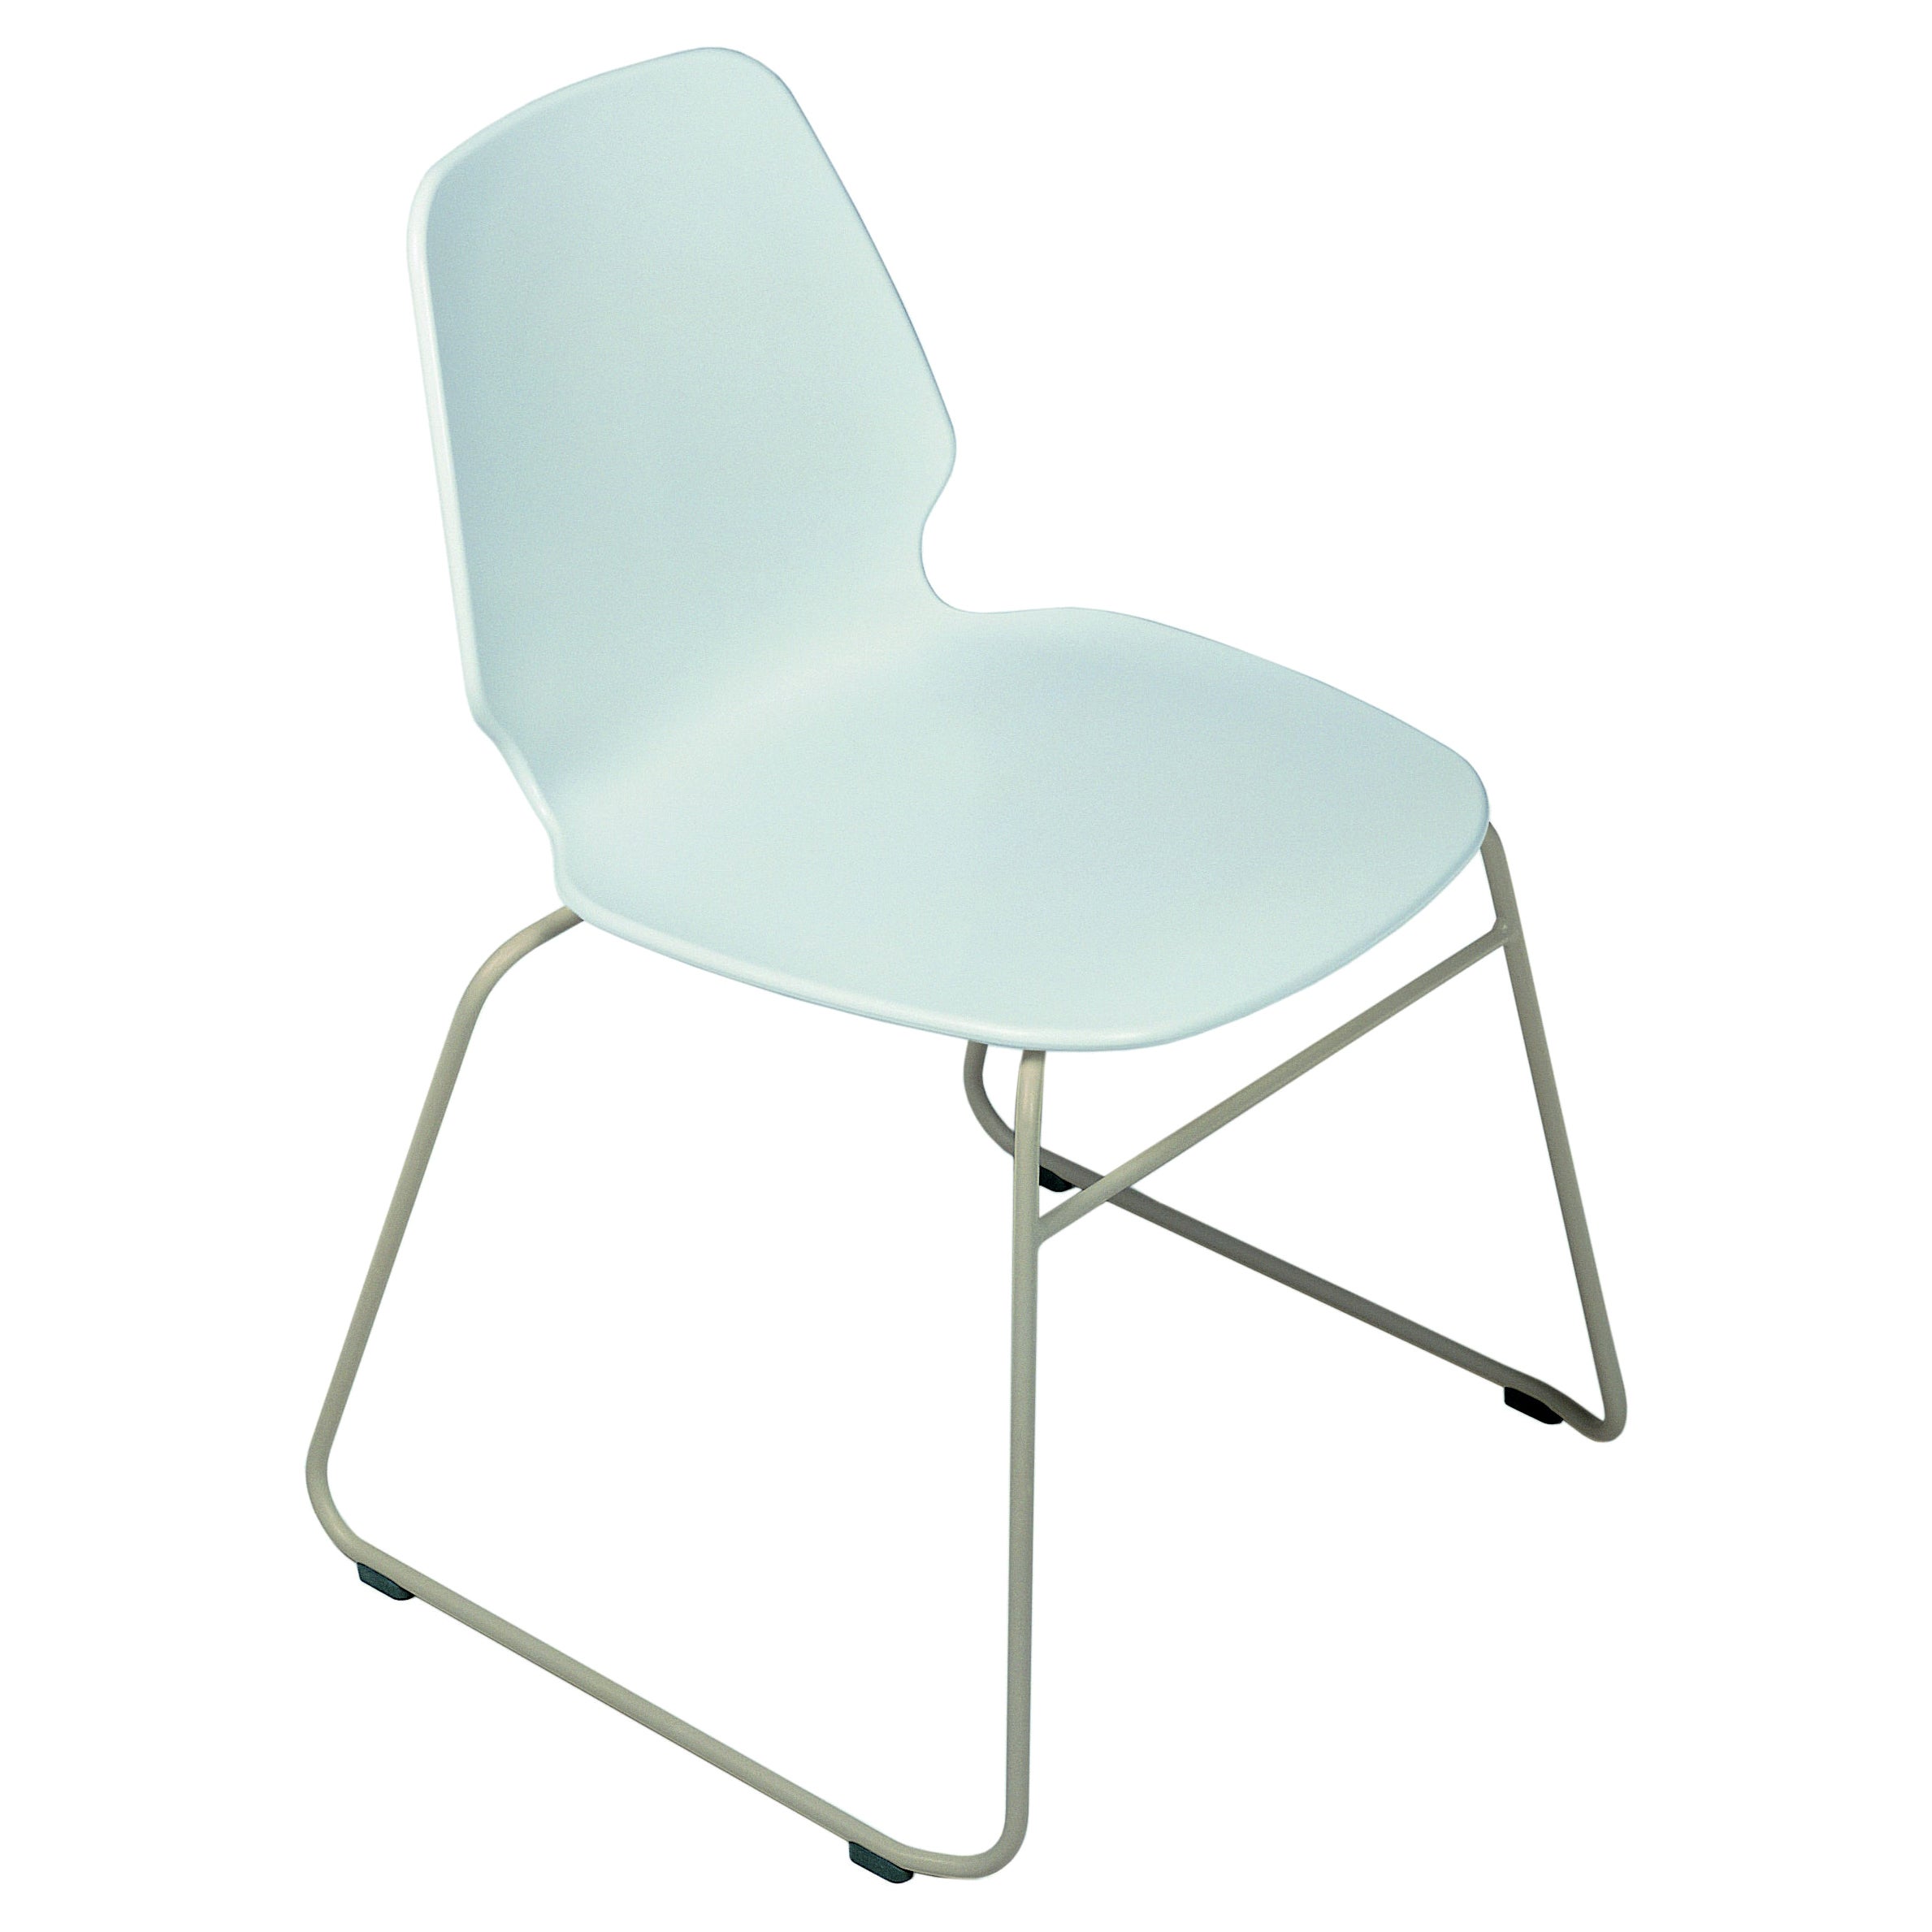 Alias 531 Selinunte Sledge Chair in White Seat and Sand Lacquered Steel Frame For Sale